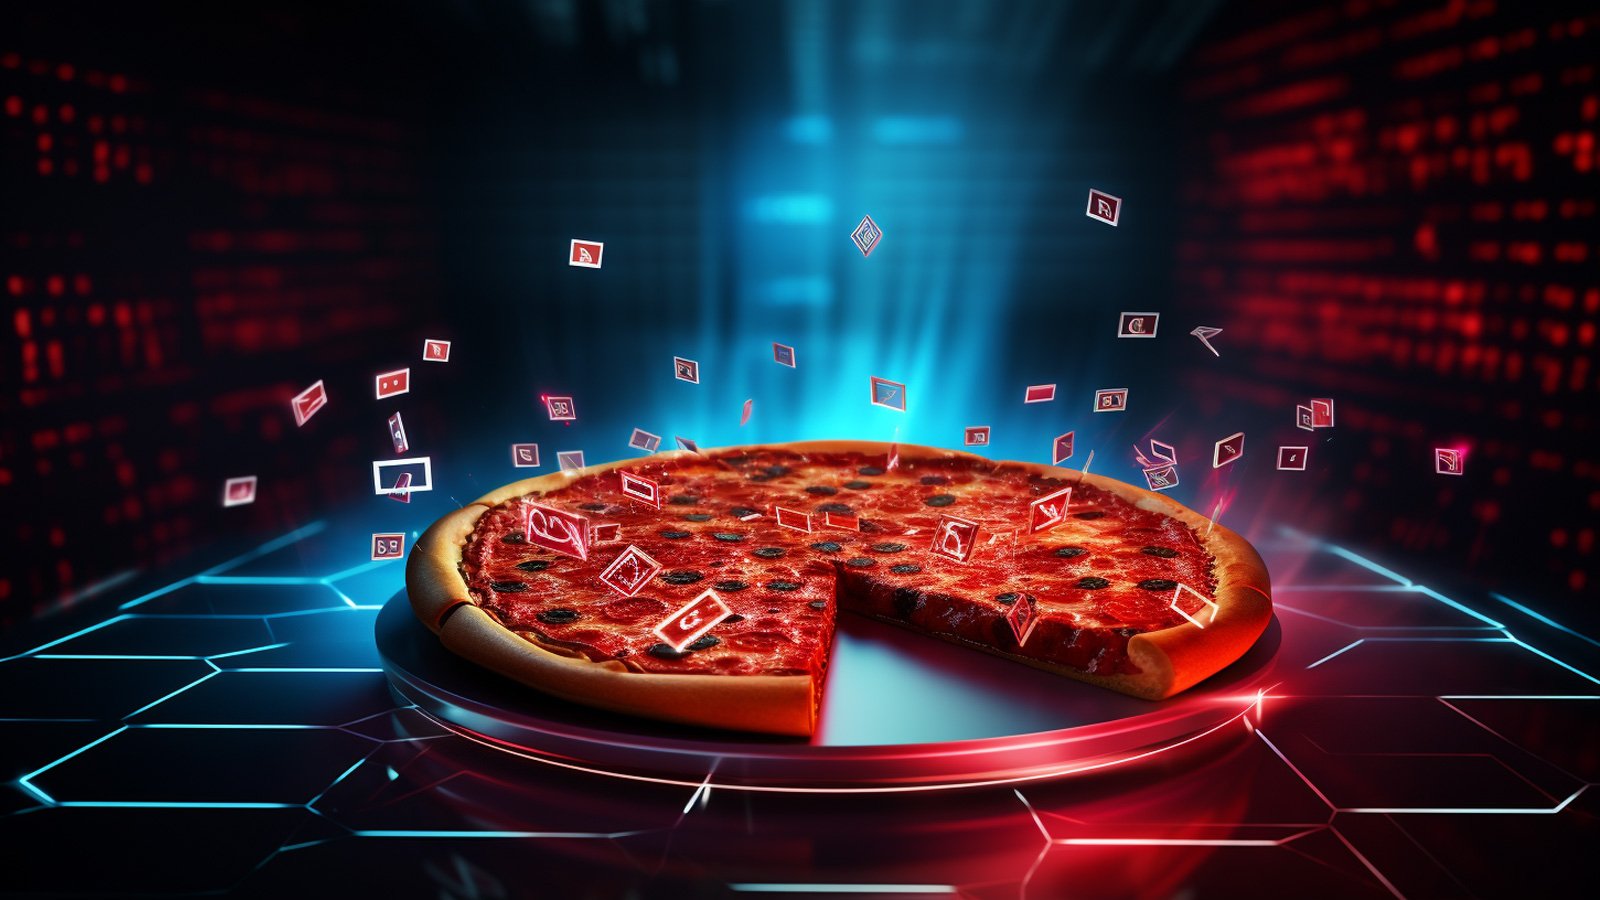 Pizza with data flying off of it